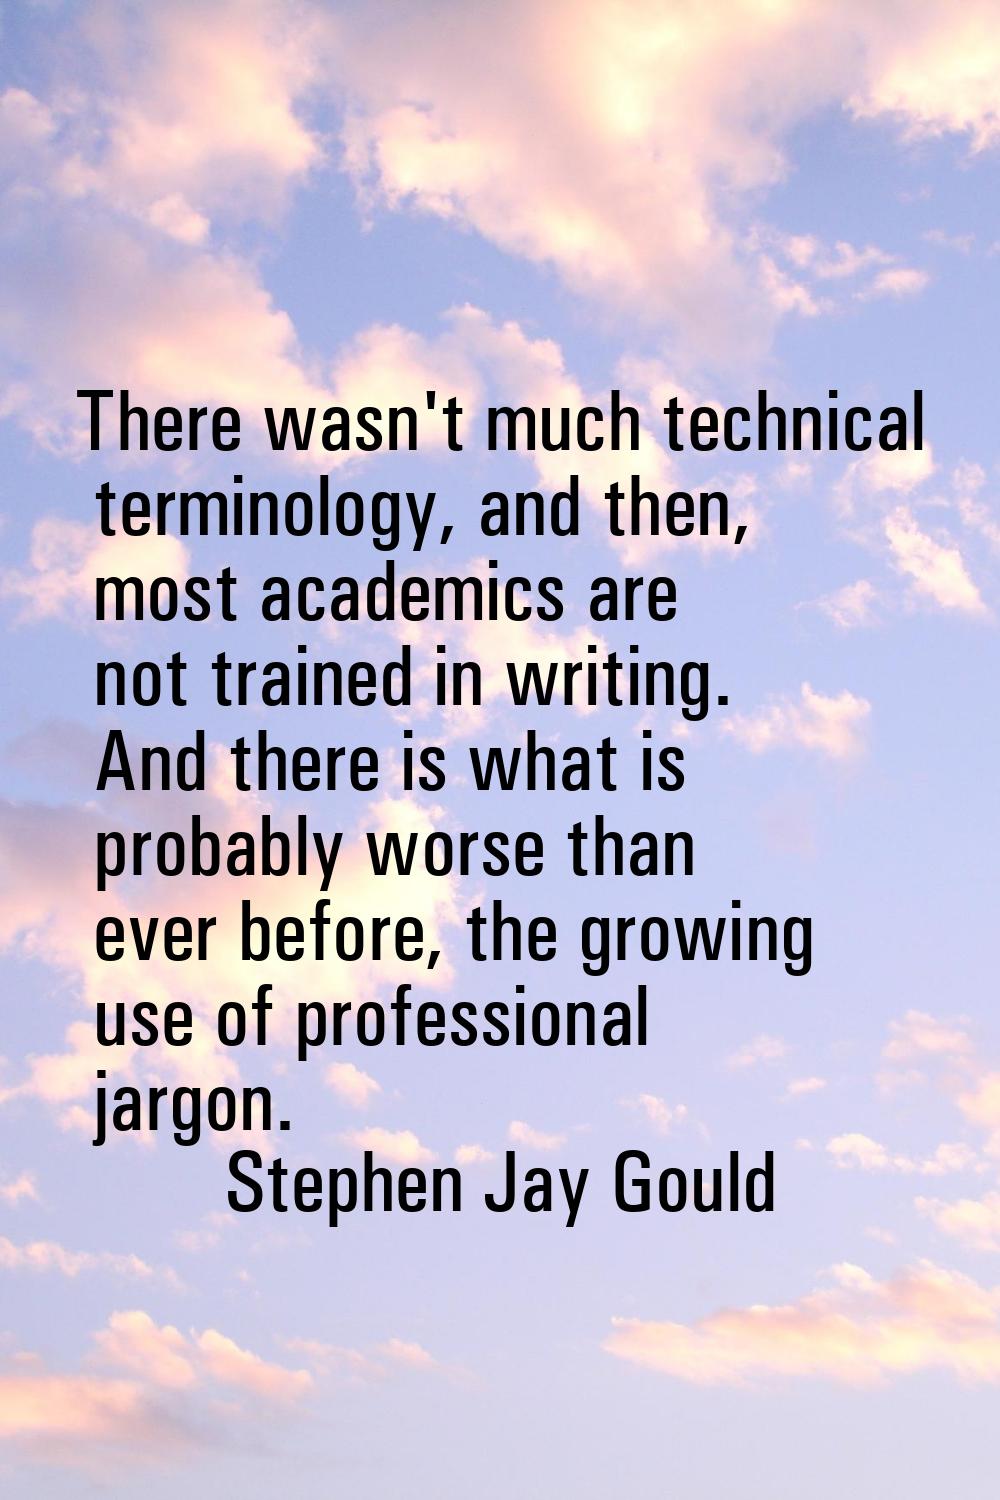 There wasn't much technical terminology, and then, most academics are not trained in writing. And t